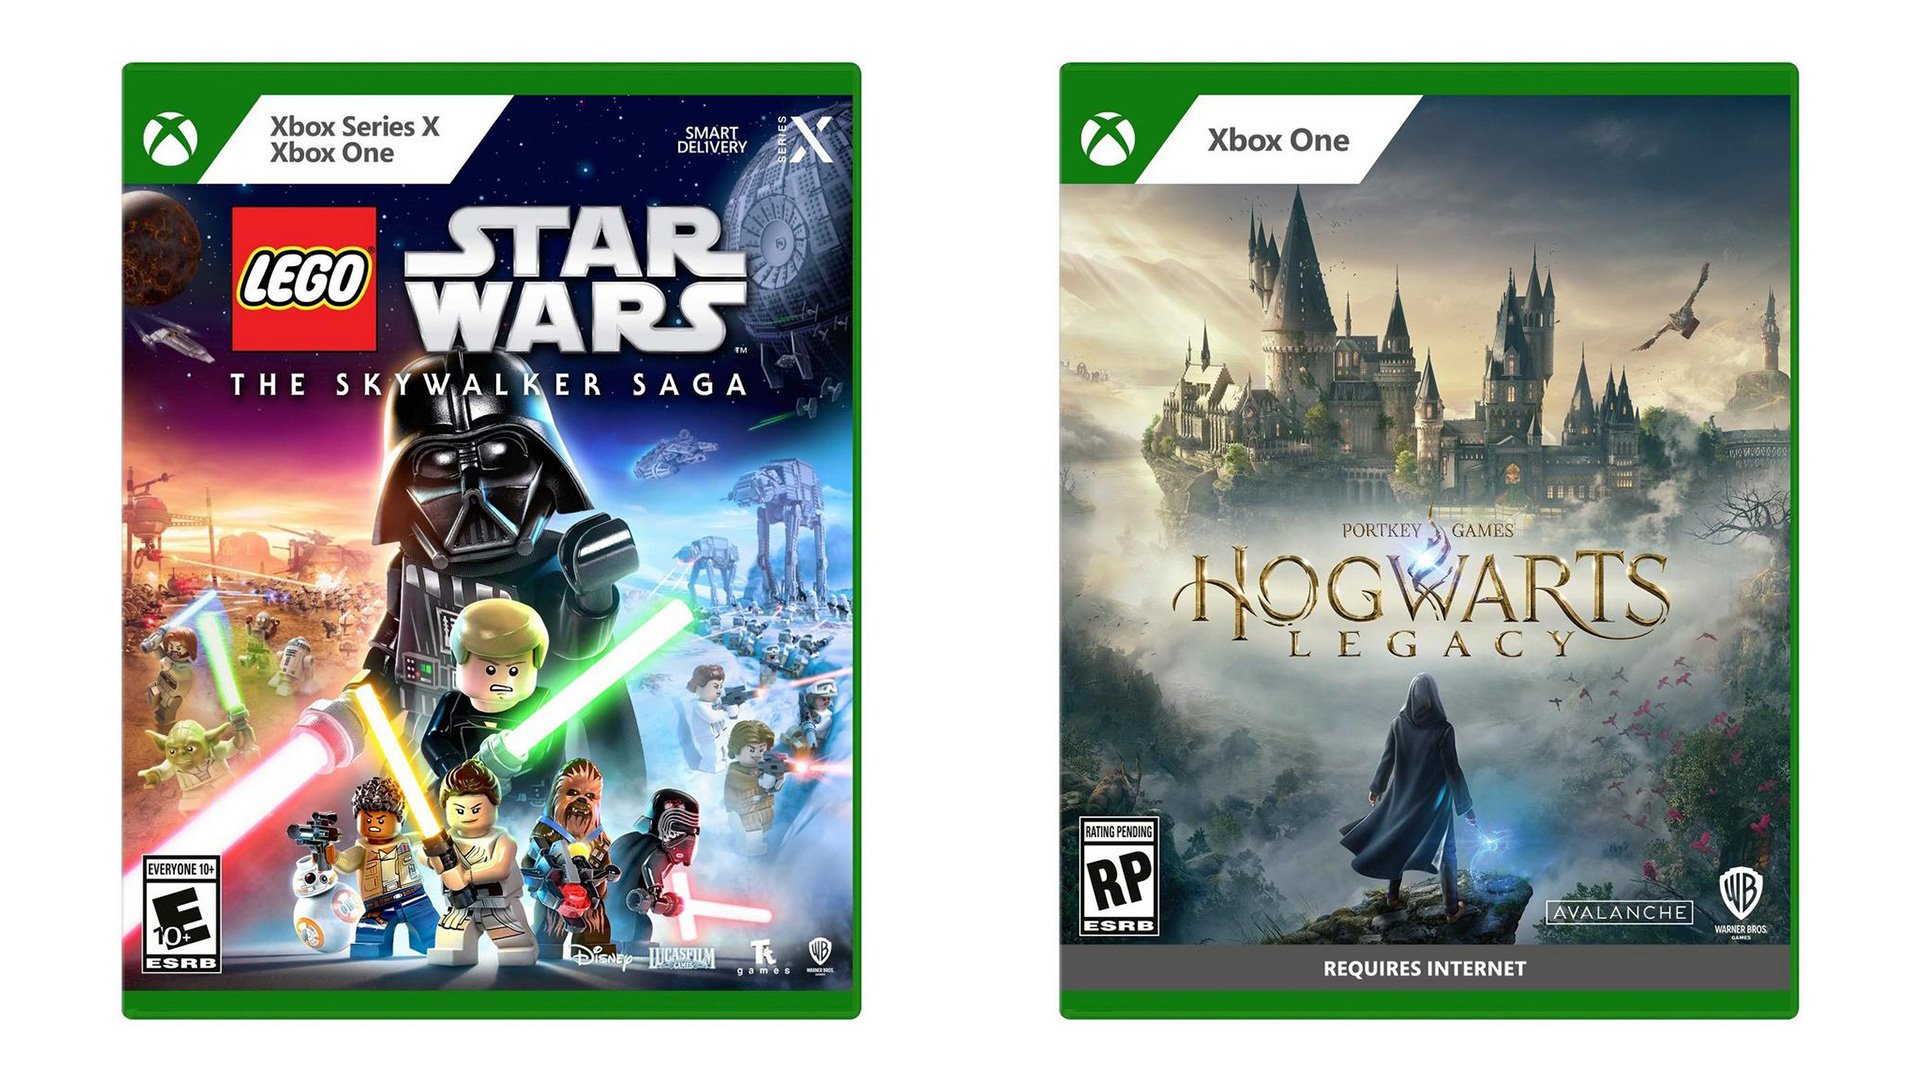 Hogwarts Legacy: Digital Deluxe Edition Xbox Series X|S (US)